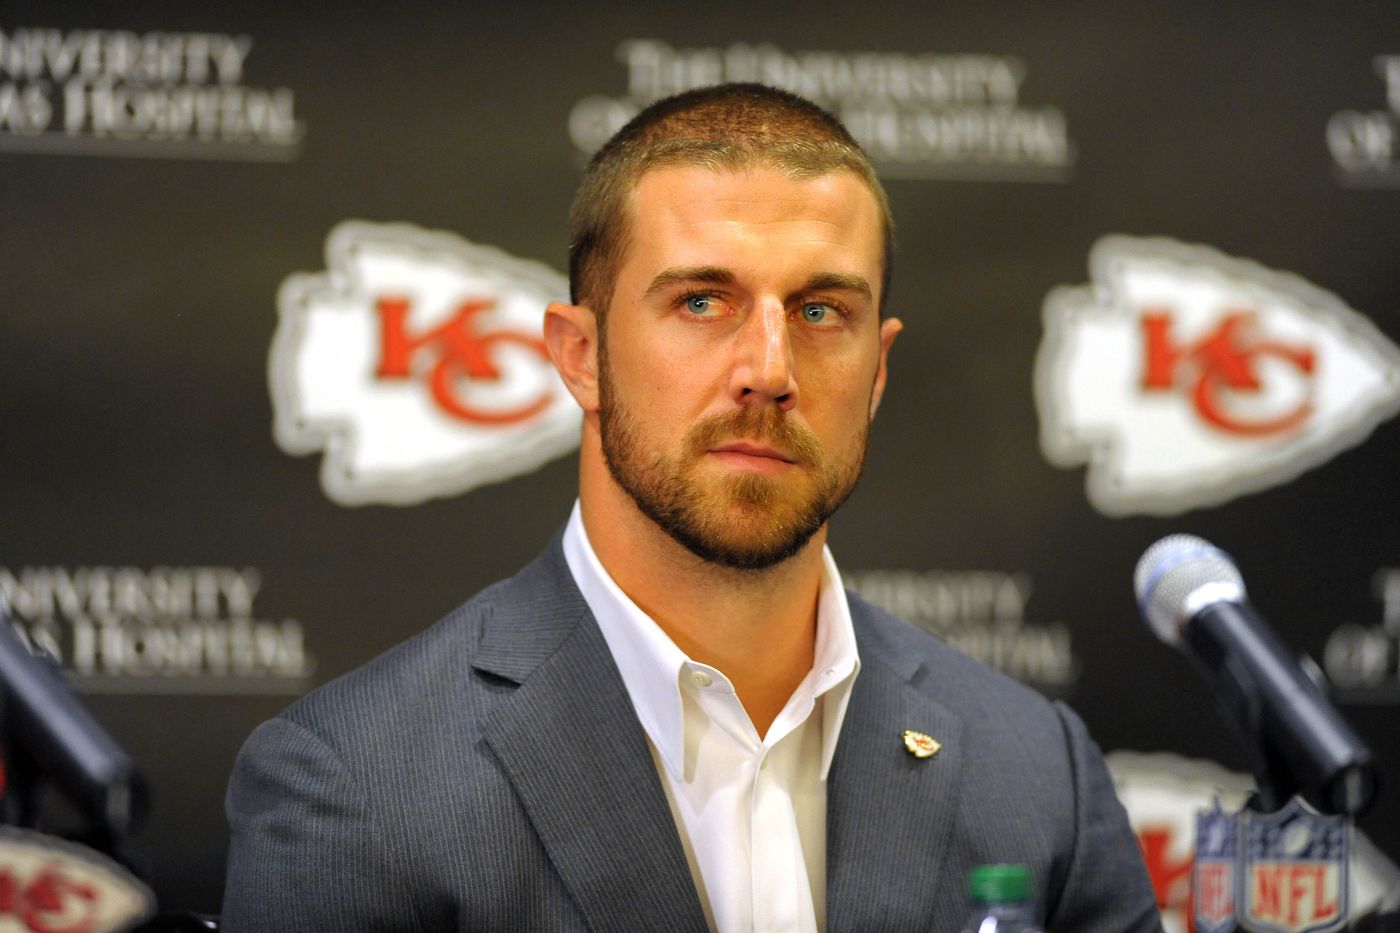 Alex Smith wearing gray suit